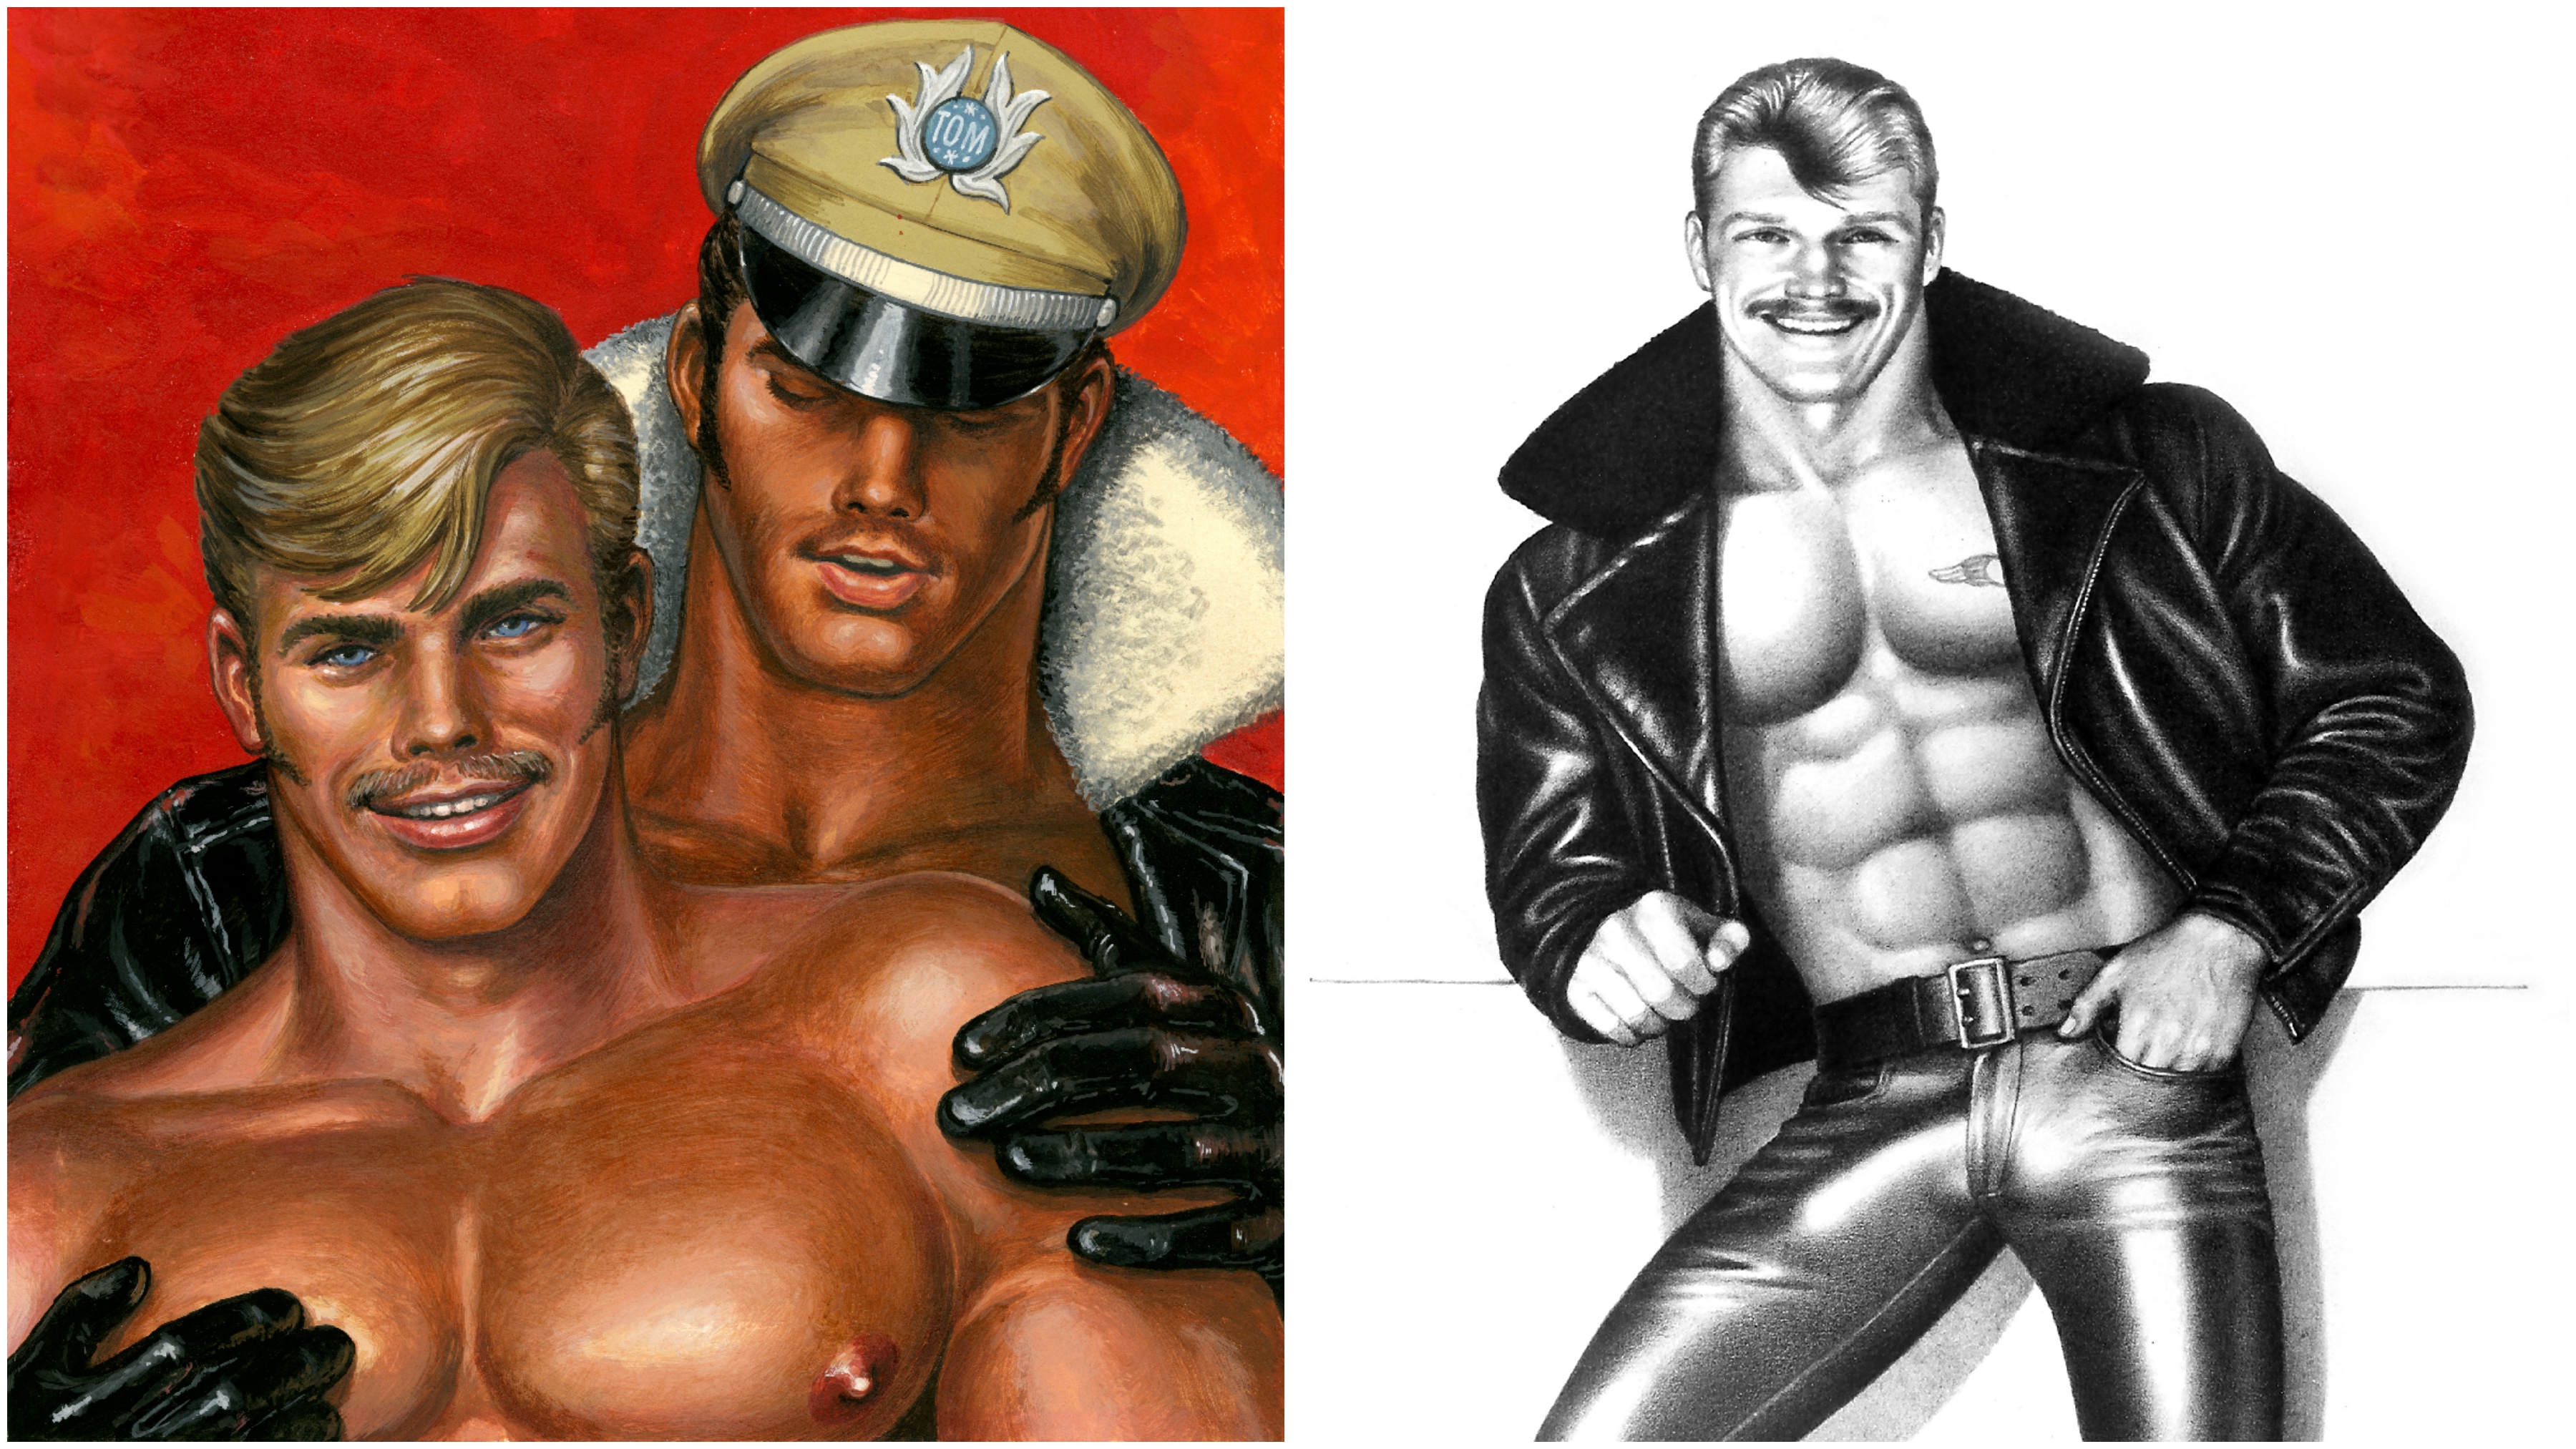 Tom of Finland's Explicit Art Radically Changed How We View Gay Sexual...